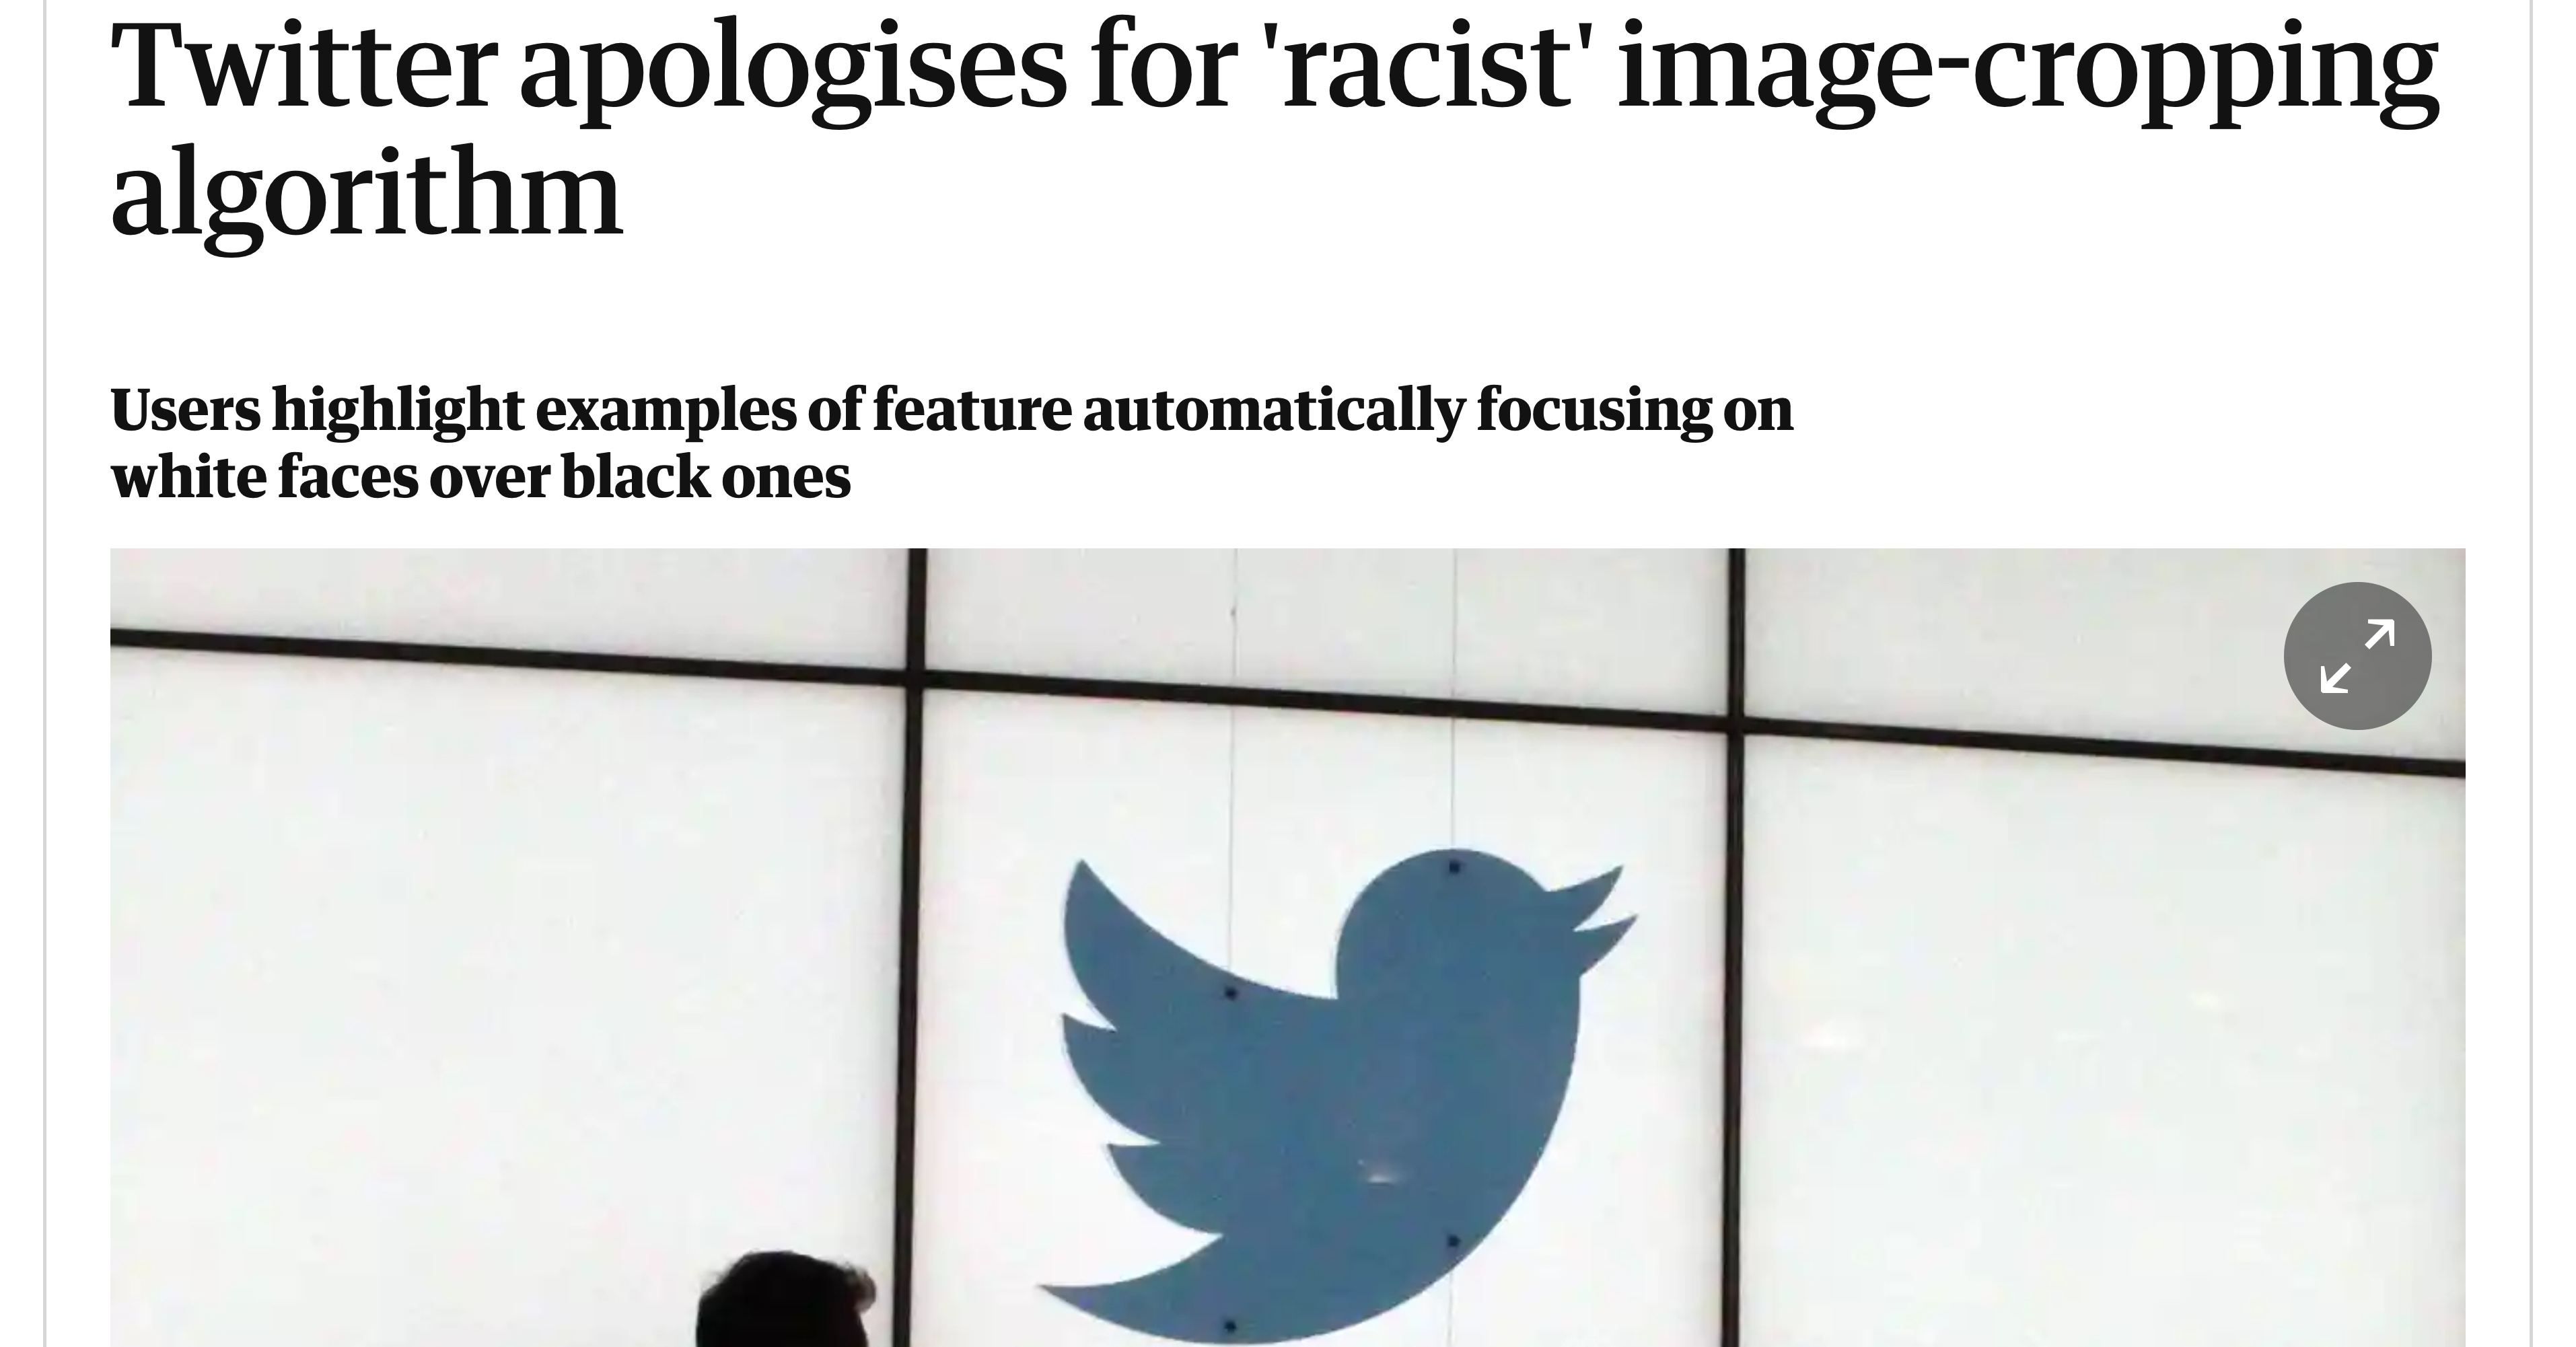 Twitter Apologizes for 'racist' image-cropping algorithm.
Users highlight examples of feature automatically focusing on
white faces over Black ones
